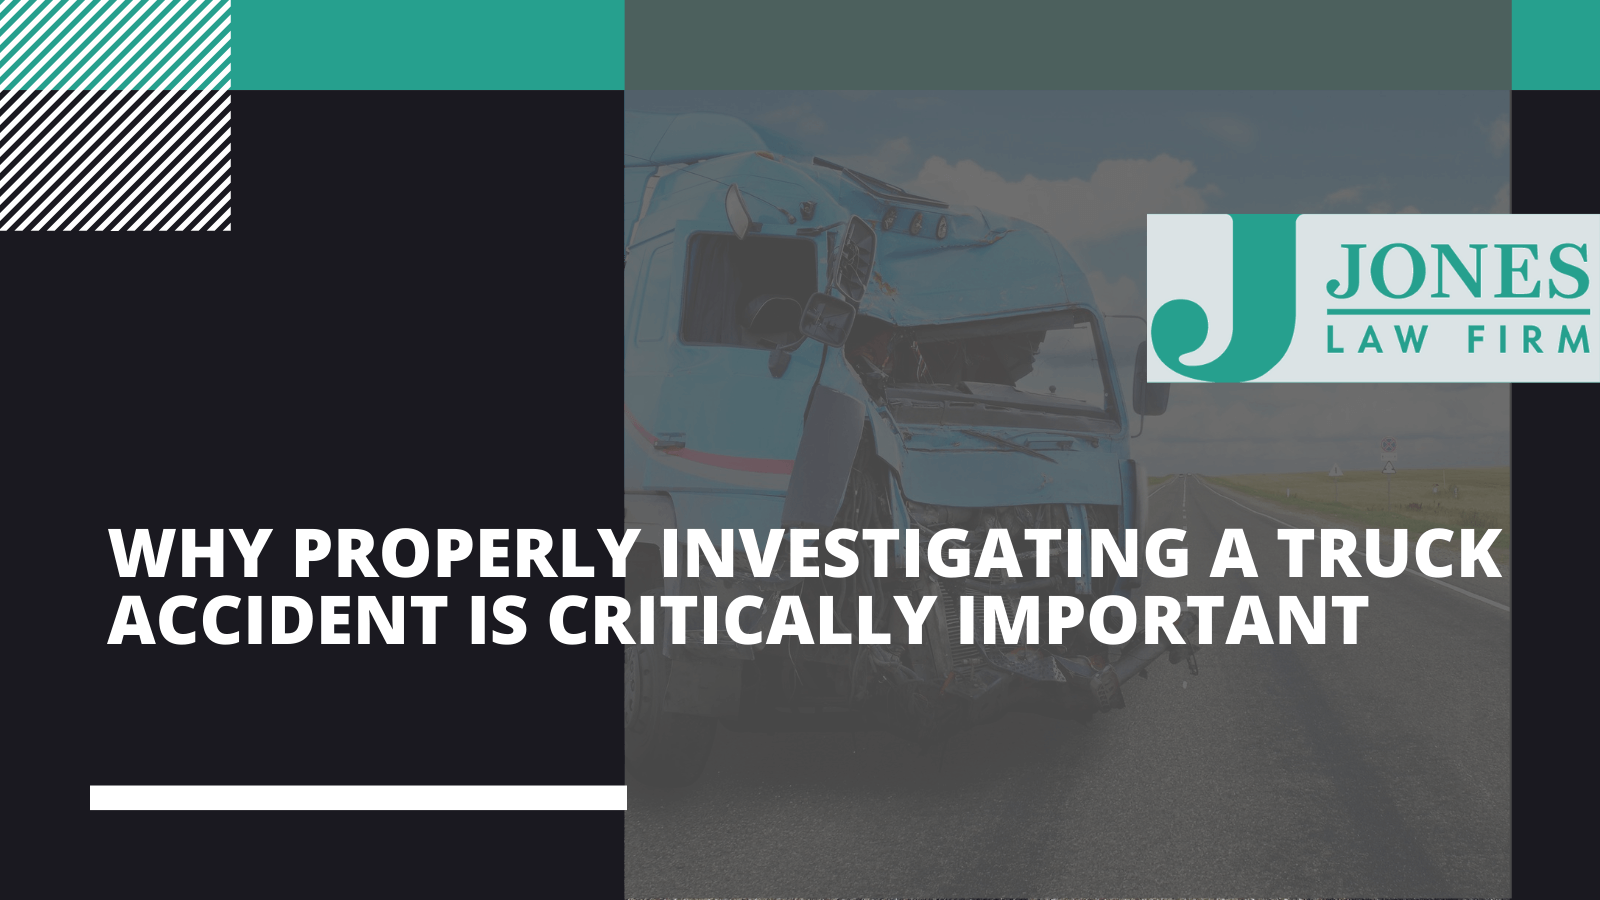 Why Properly Investigating a Truck Accident Is Critically Important - Jones law firm - Alexandria louisiana